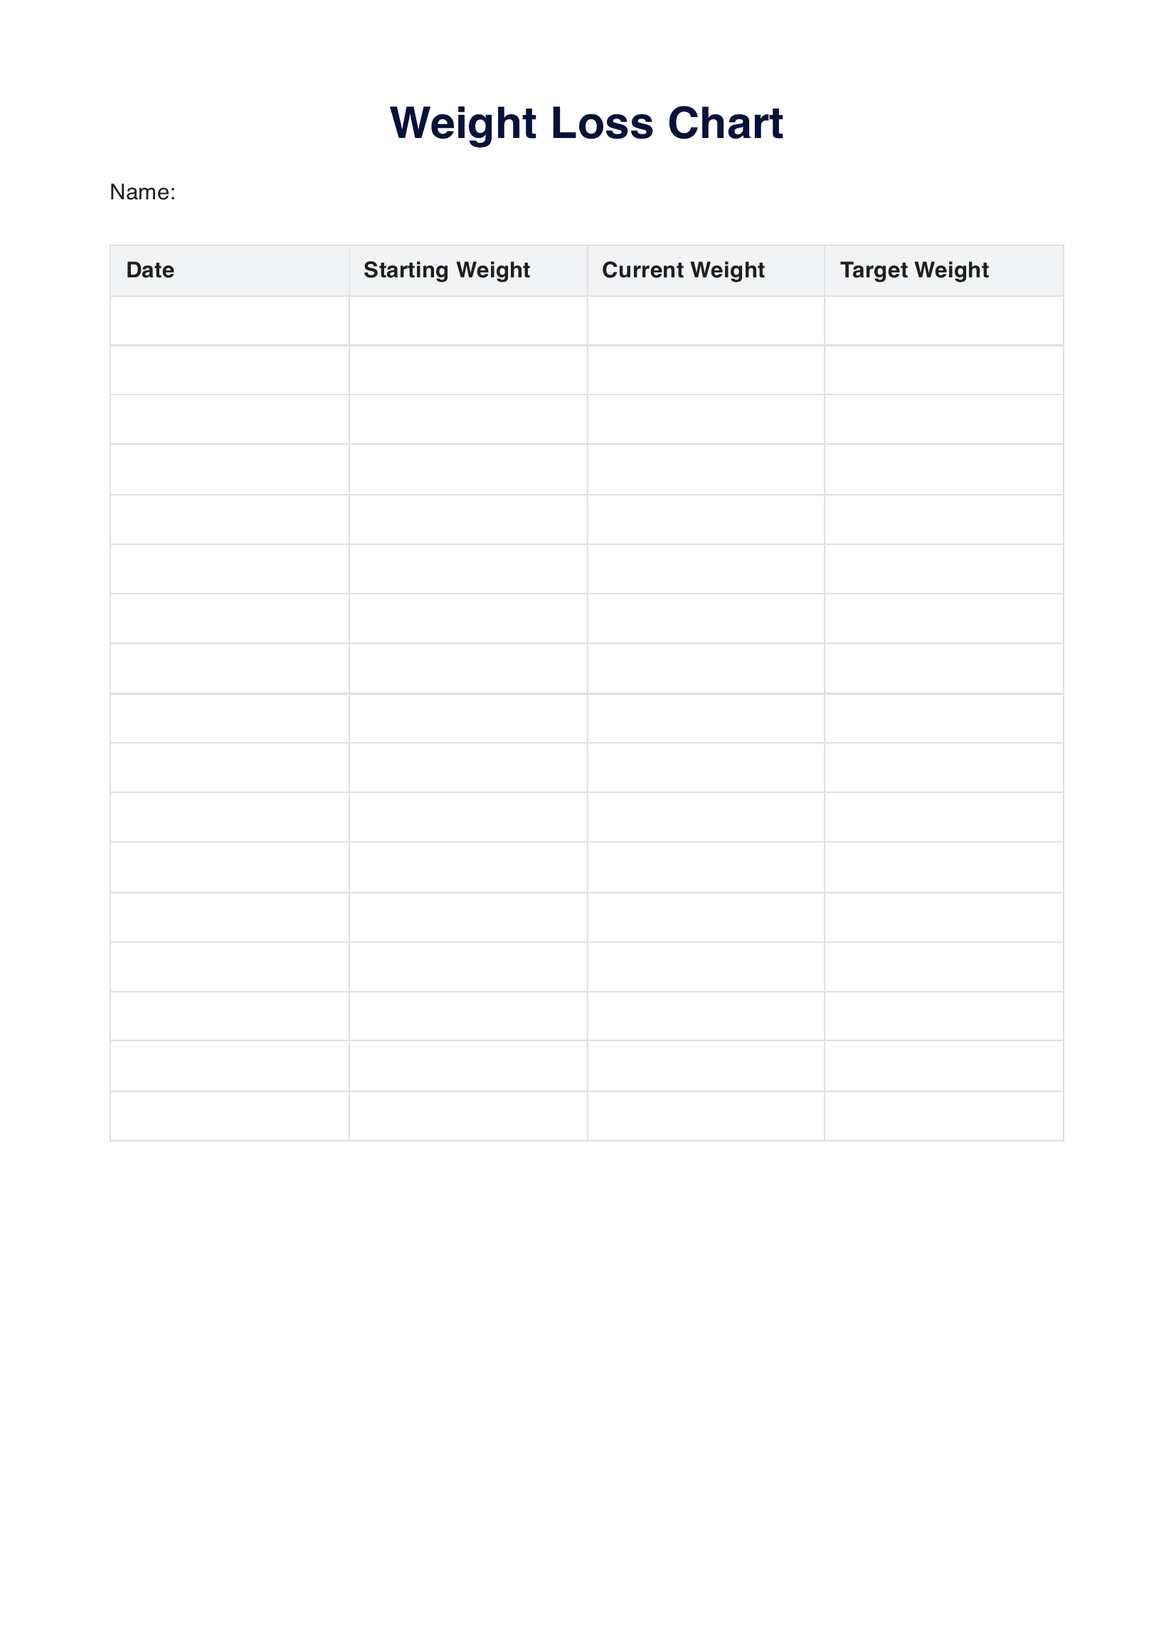 Weight Loss Chart PDF Example